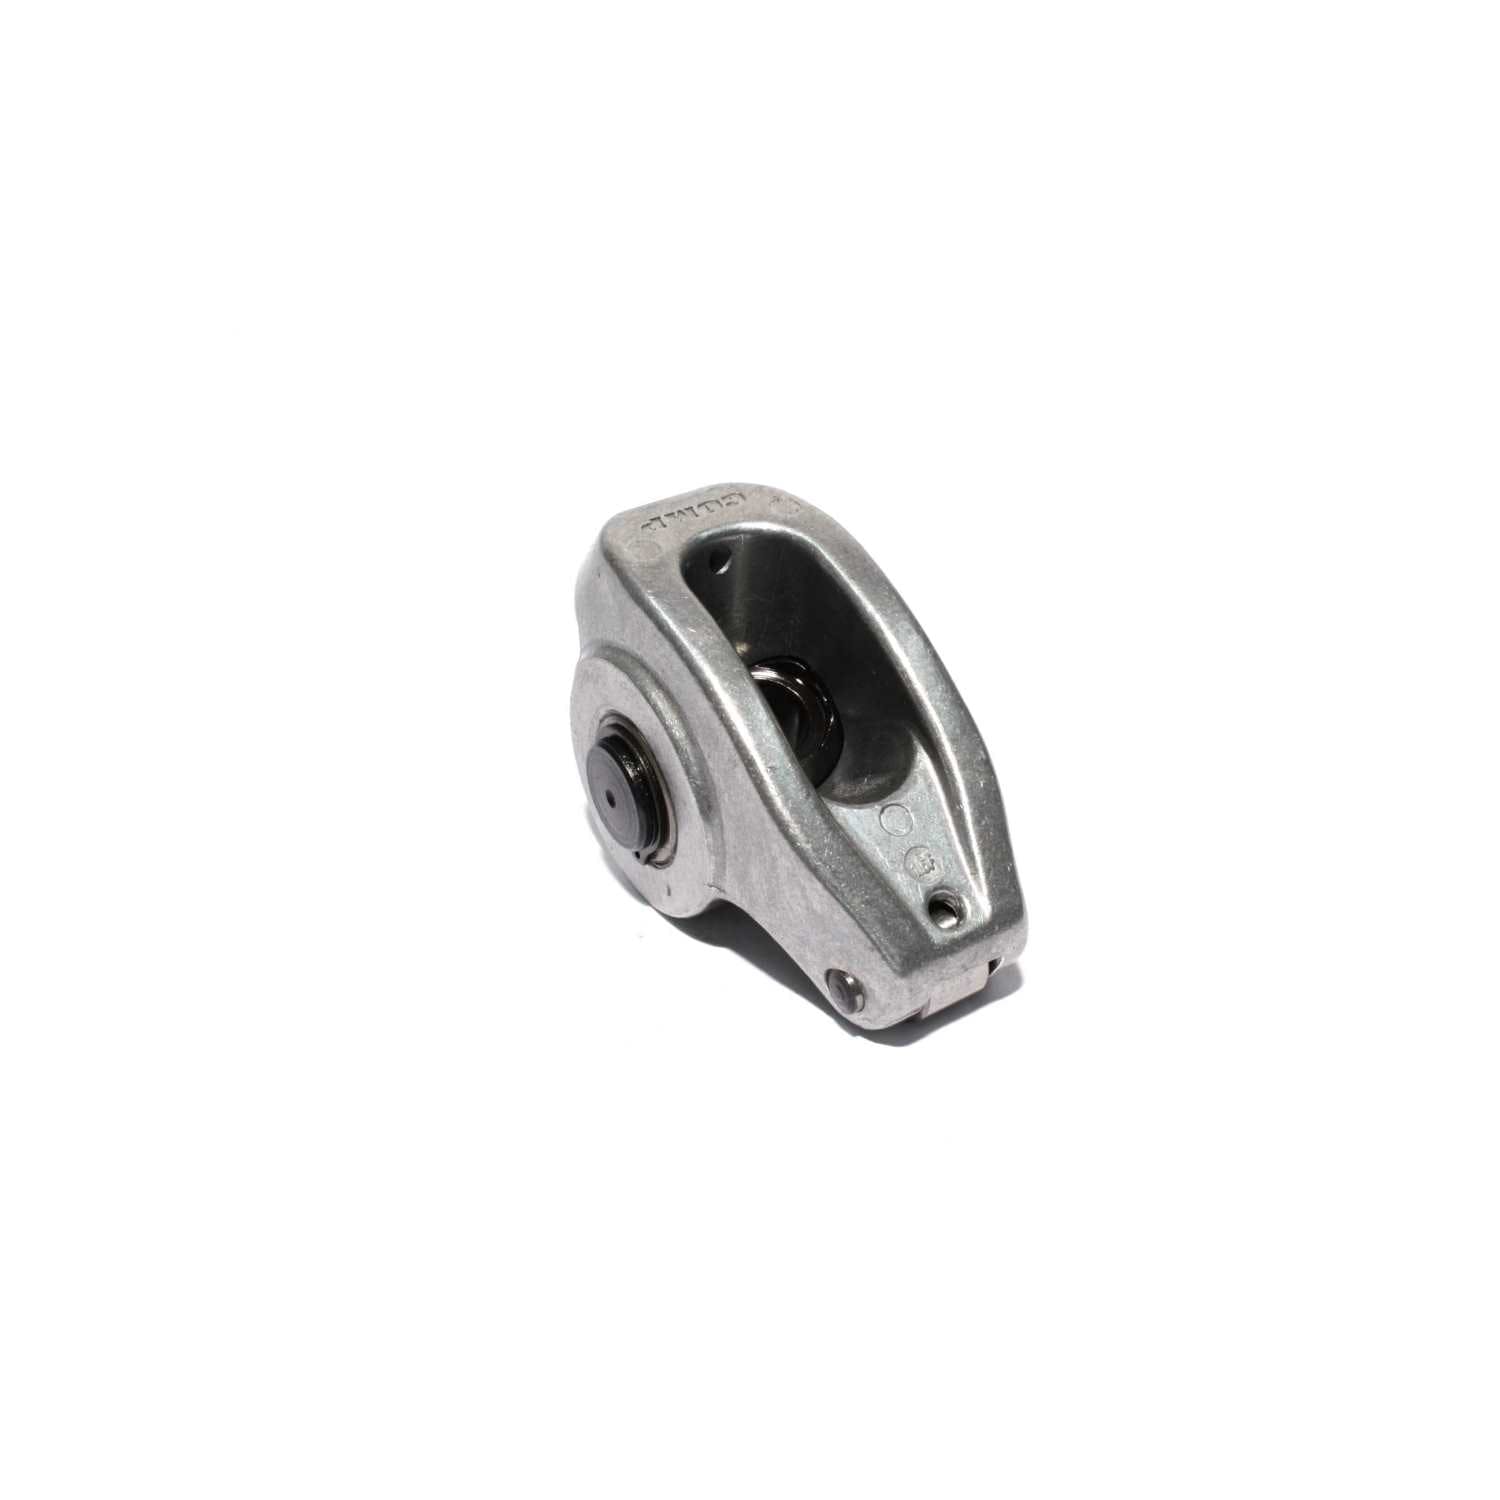 Competition Cams 17044-1 High Energy Die Cast Aluminum Roller Rocker Arm